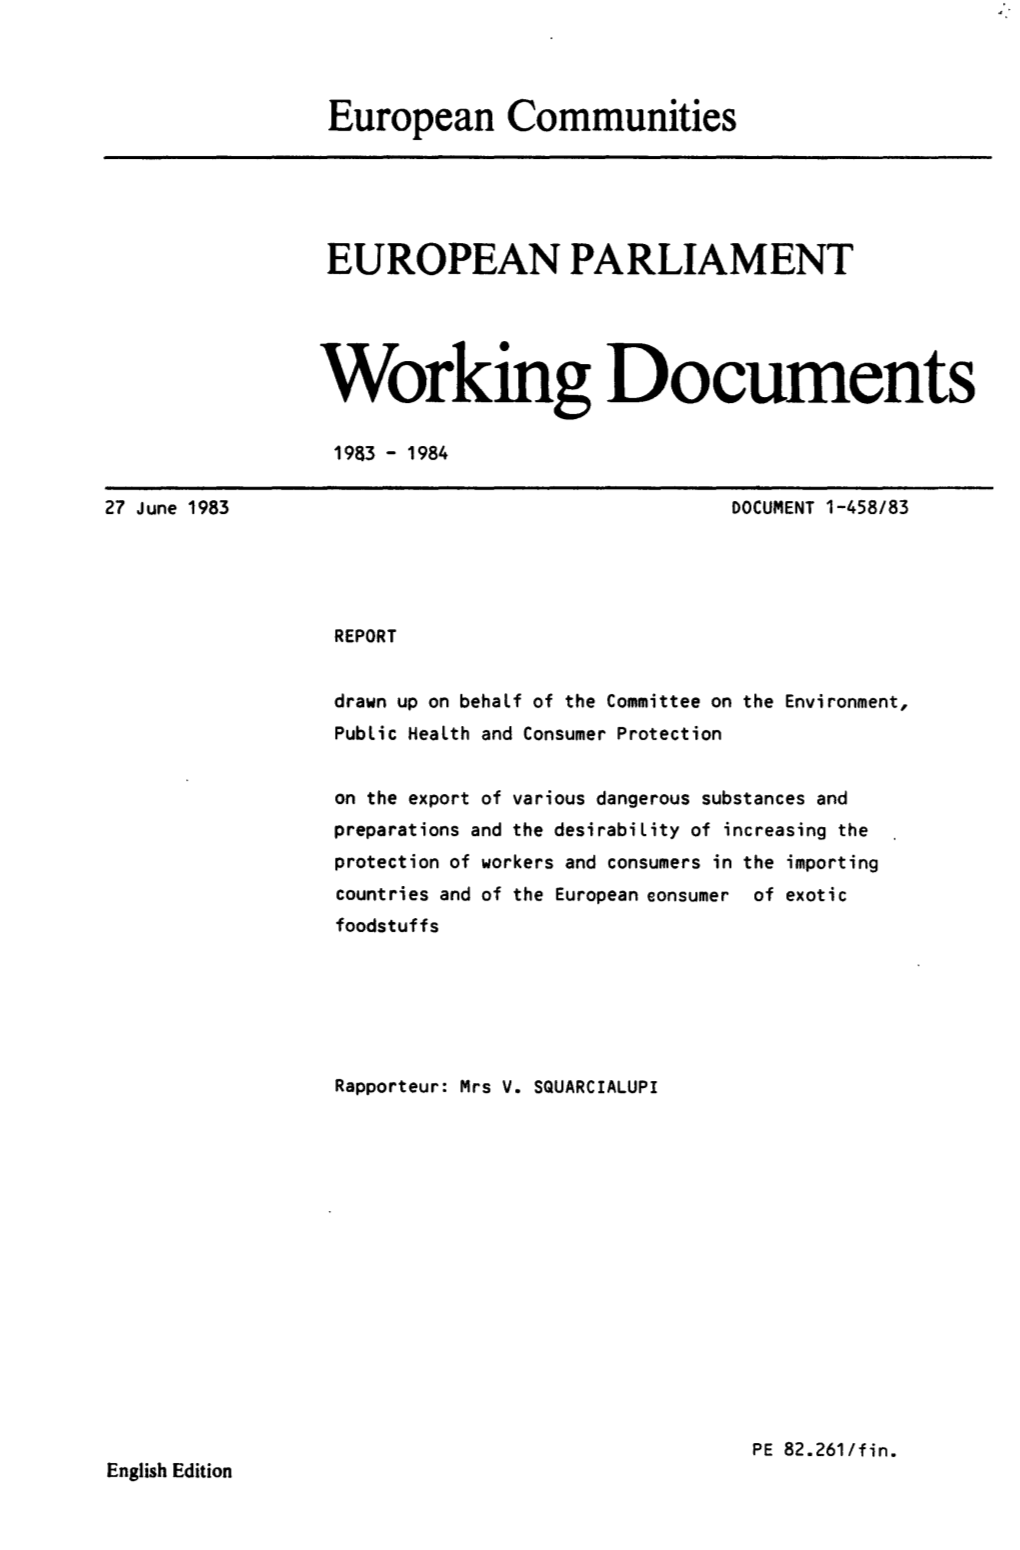 Working Documents 1983 - 1984